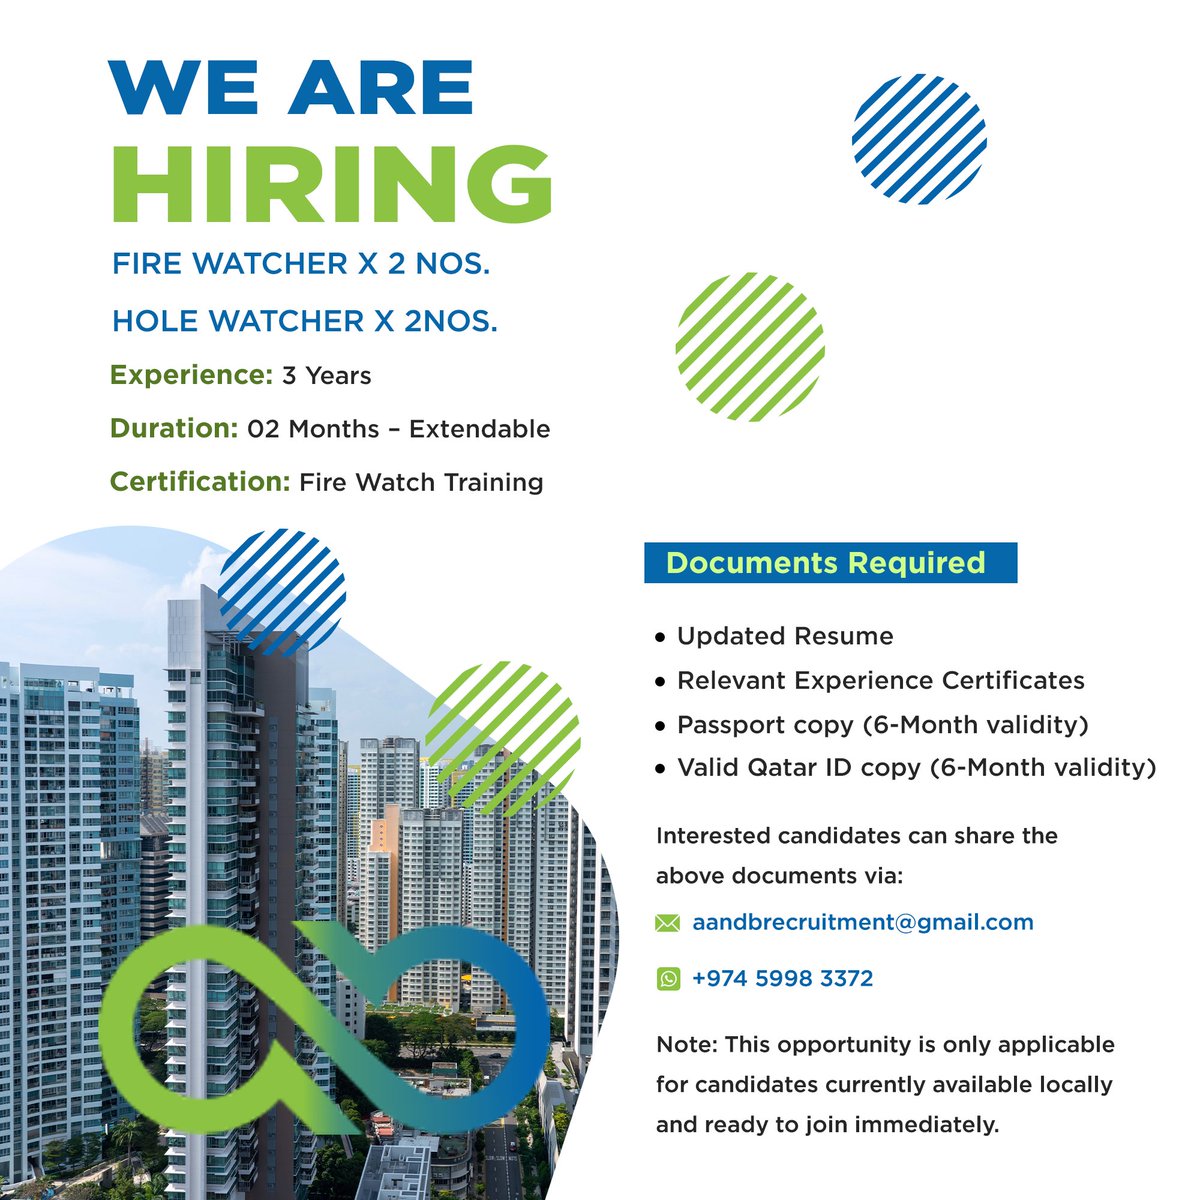 Join Our Team as a Civil/ MEP Supervisor, Fire Watcher & Hole Watcher in Qatar.
To apply, send your resume to aandbrecruitment@gmail.com or contact +974 – 59983372
.
.
.
#AandBprojects #qatarjob  #Doha #jobpost